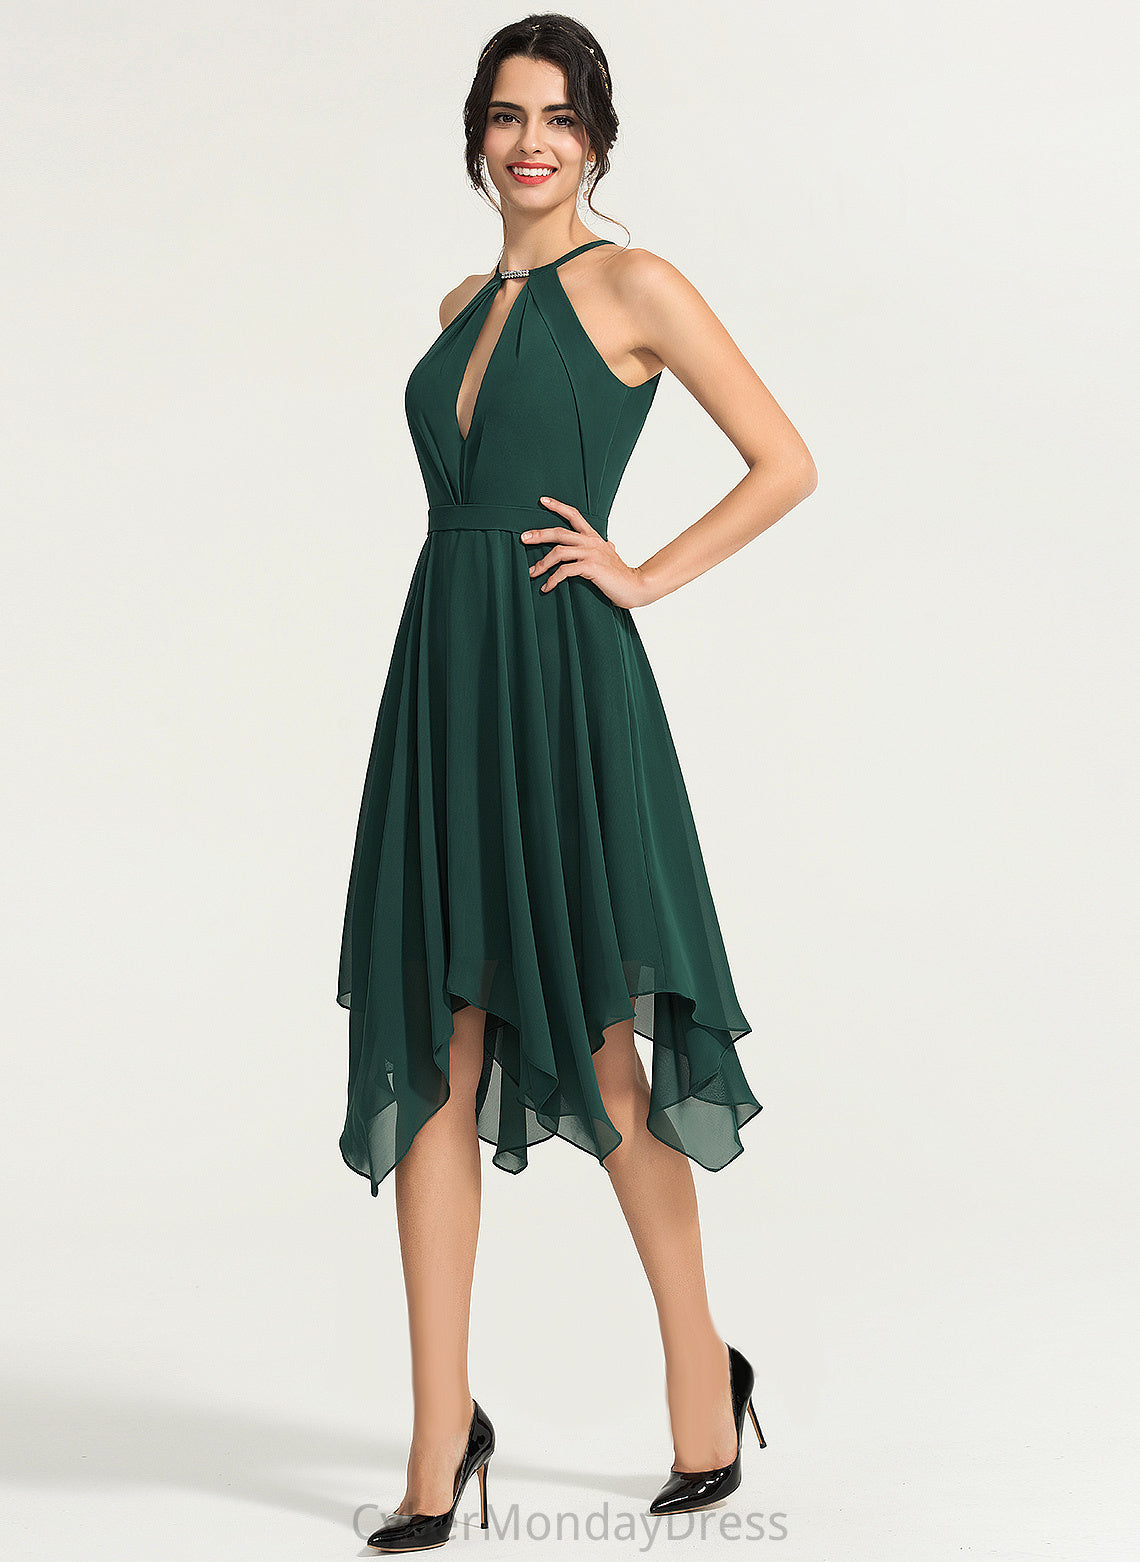 Cocktail A-Line Beading Areli With Neck Cocktail Dresses Chiffon Asymmetrical Scoop Dress